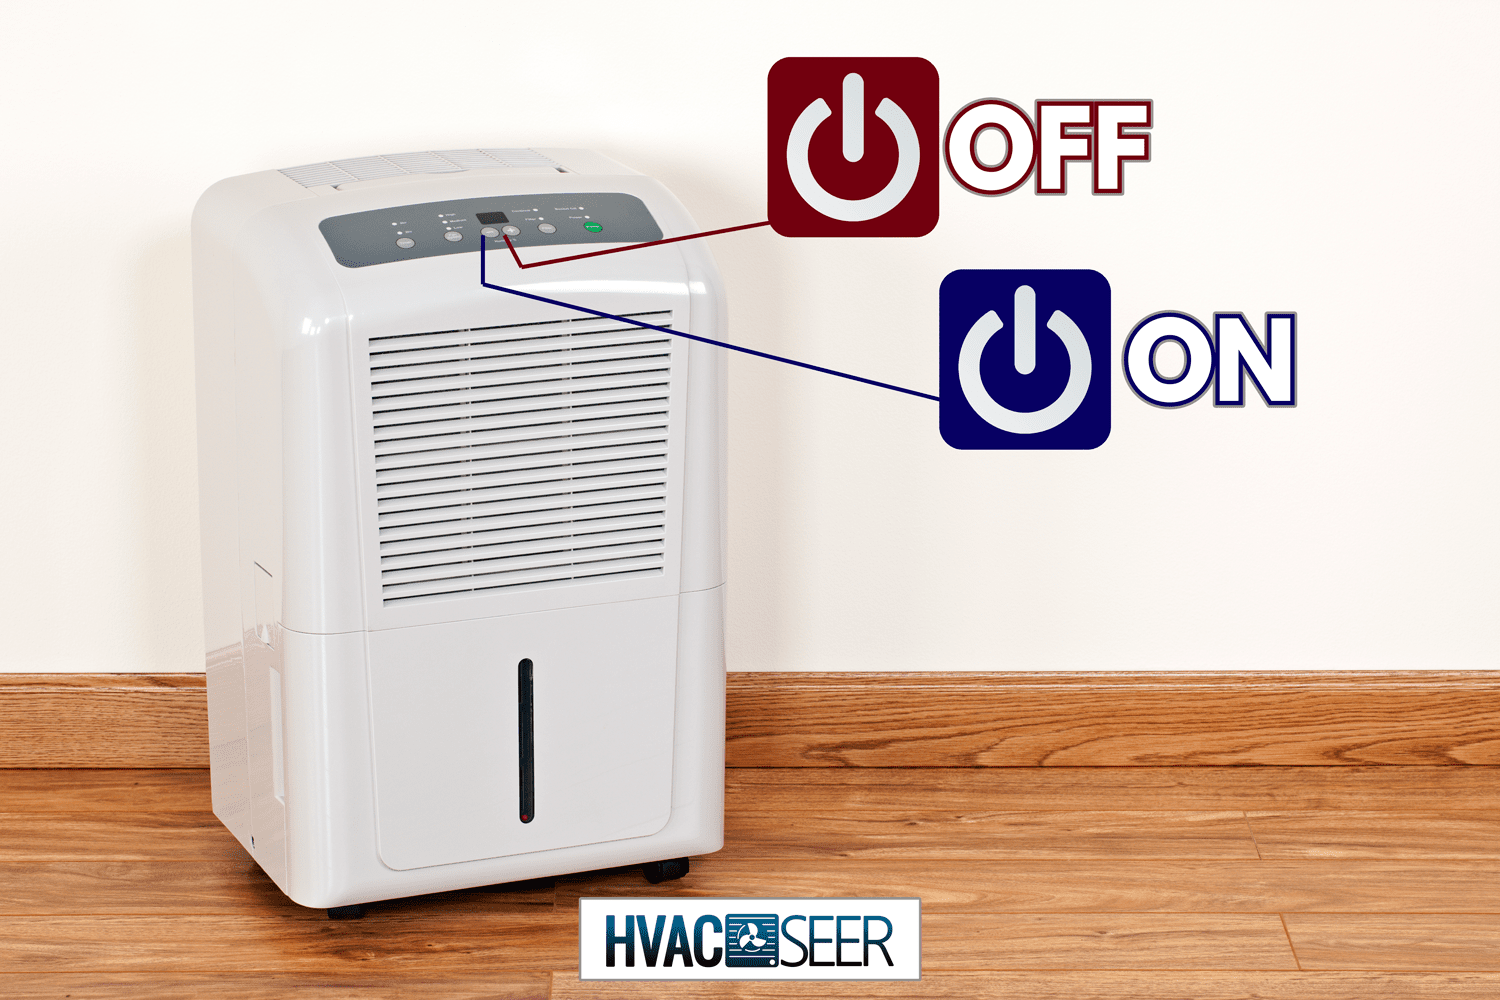 Dehumidifiers extract moisture from the air to reduce the level of humidity in the area. - Dehumidifier Compressor Turns On and Off - What To Do